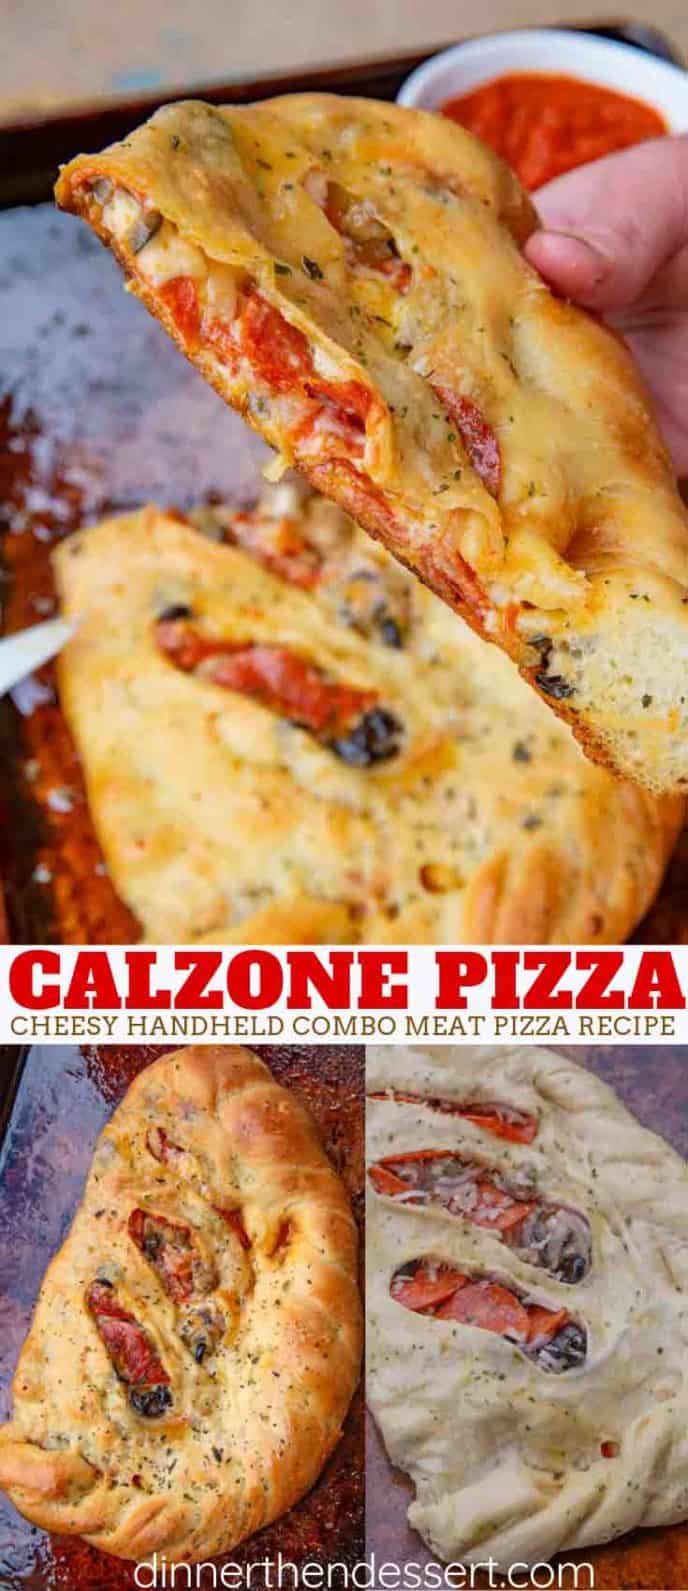 Collage of Calzone photos